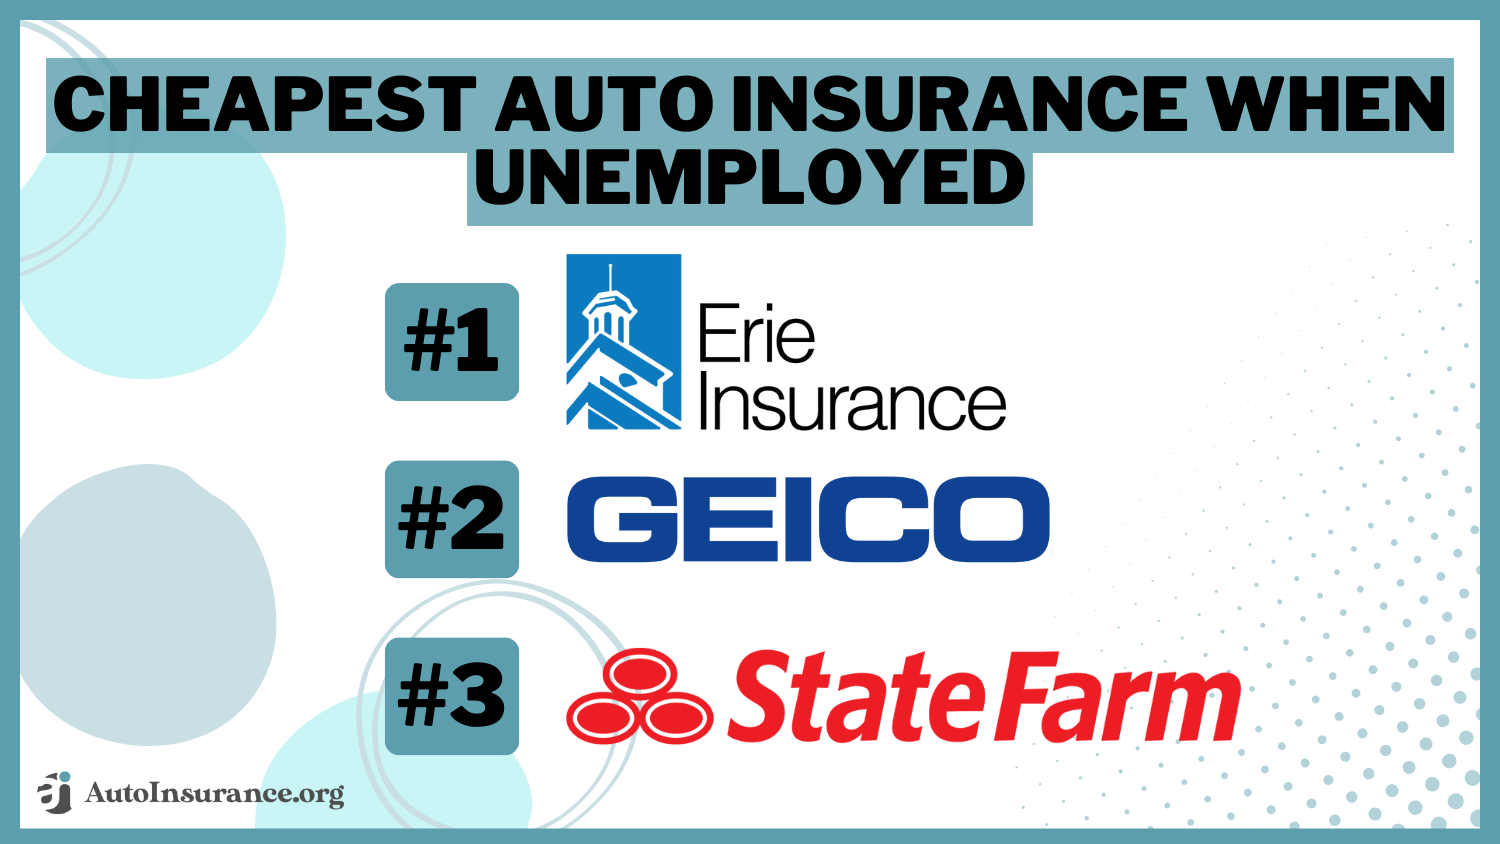 Cheapest Auto Insurance When Unemployed: Erie, Geico, State Farm